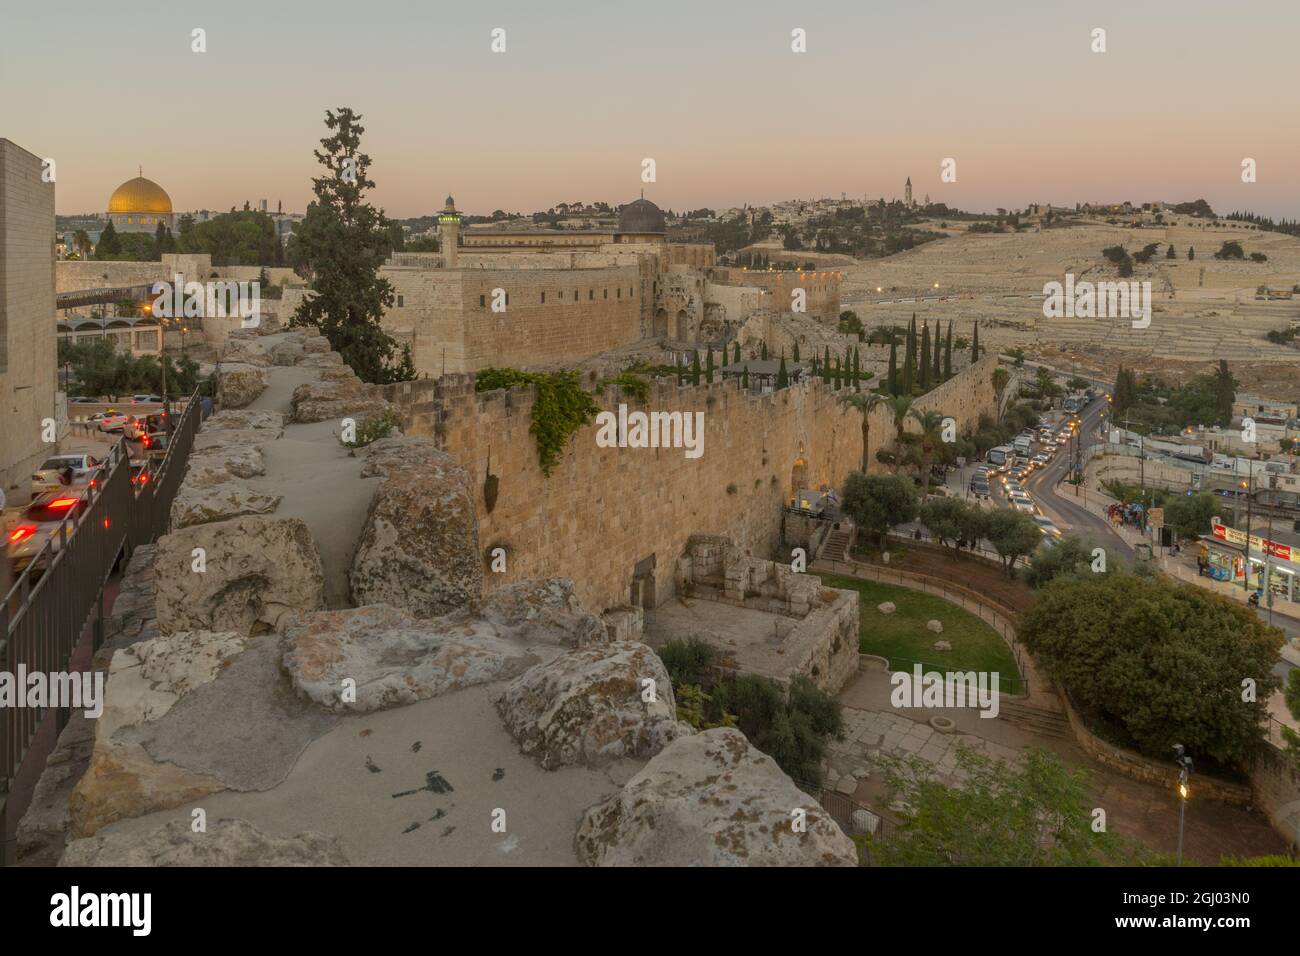 Jerusalem, Israel - August 29, 2021: Sunset view from the old city walls towards the temple mount and mount of olives, in Jerusalem, Israel Stock Photo